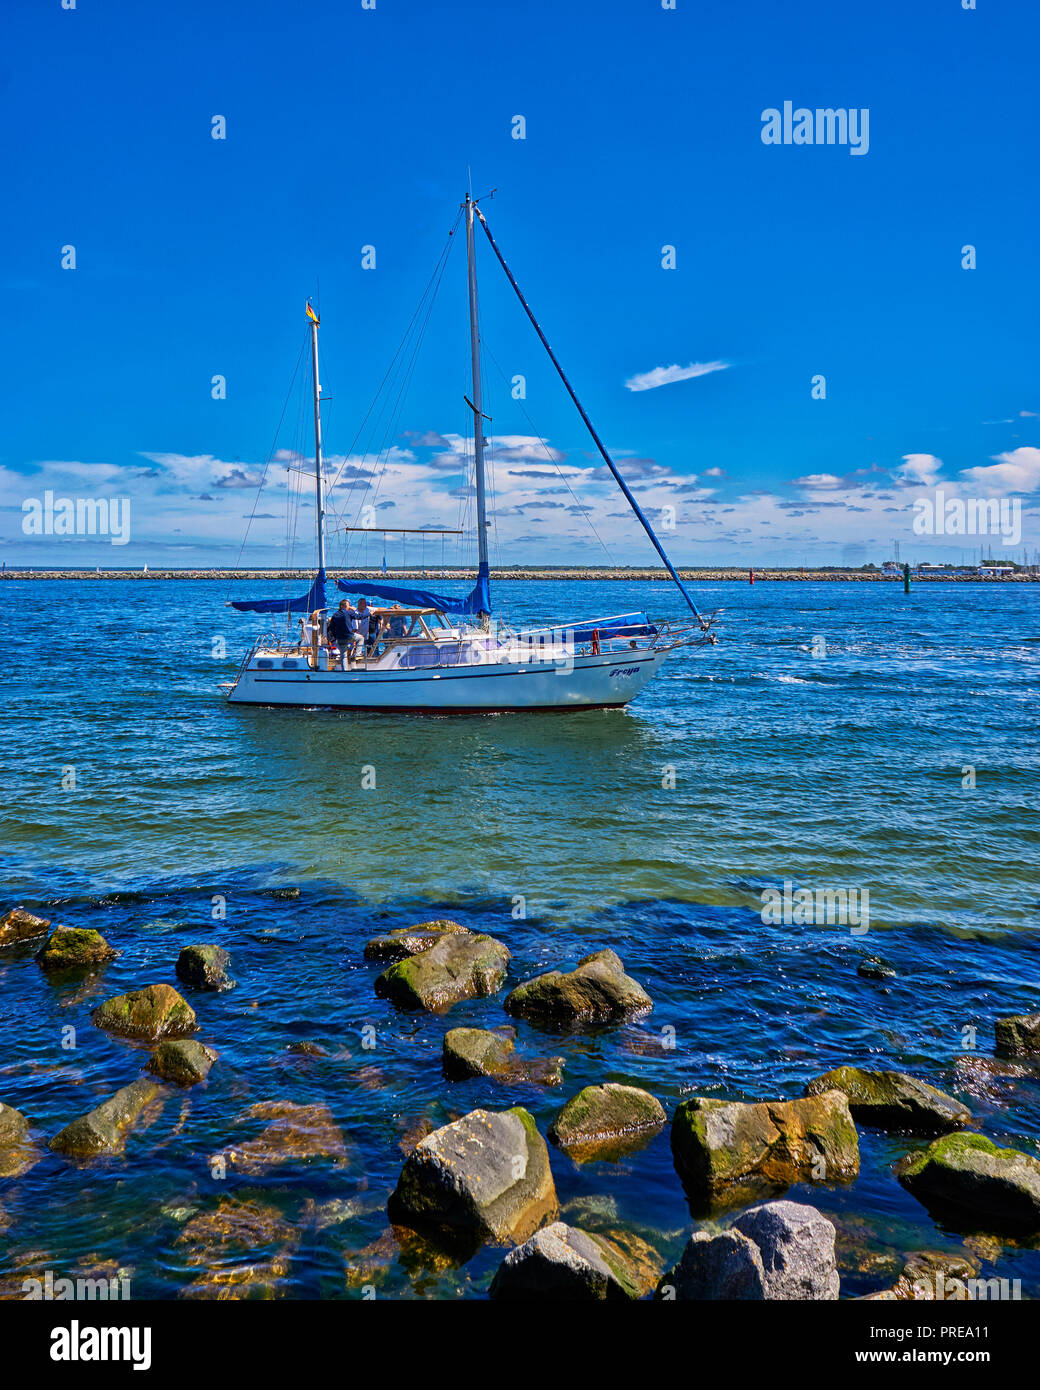 Stones and sailboat at the beach in Mecklenburg-Vorpommern, Germany Stock Photo